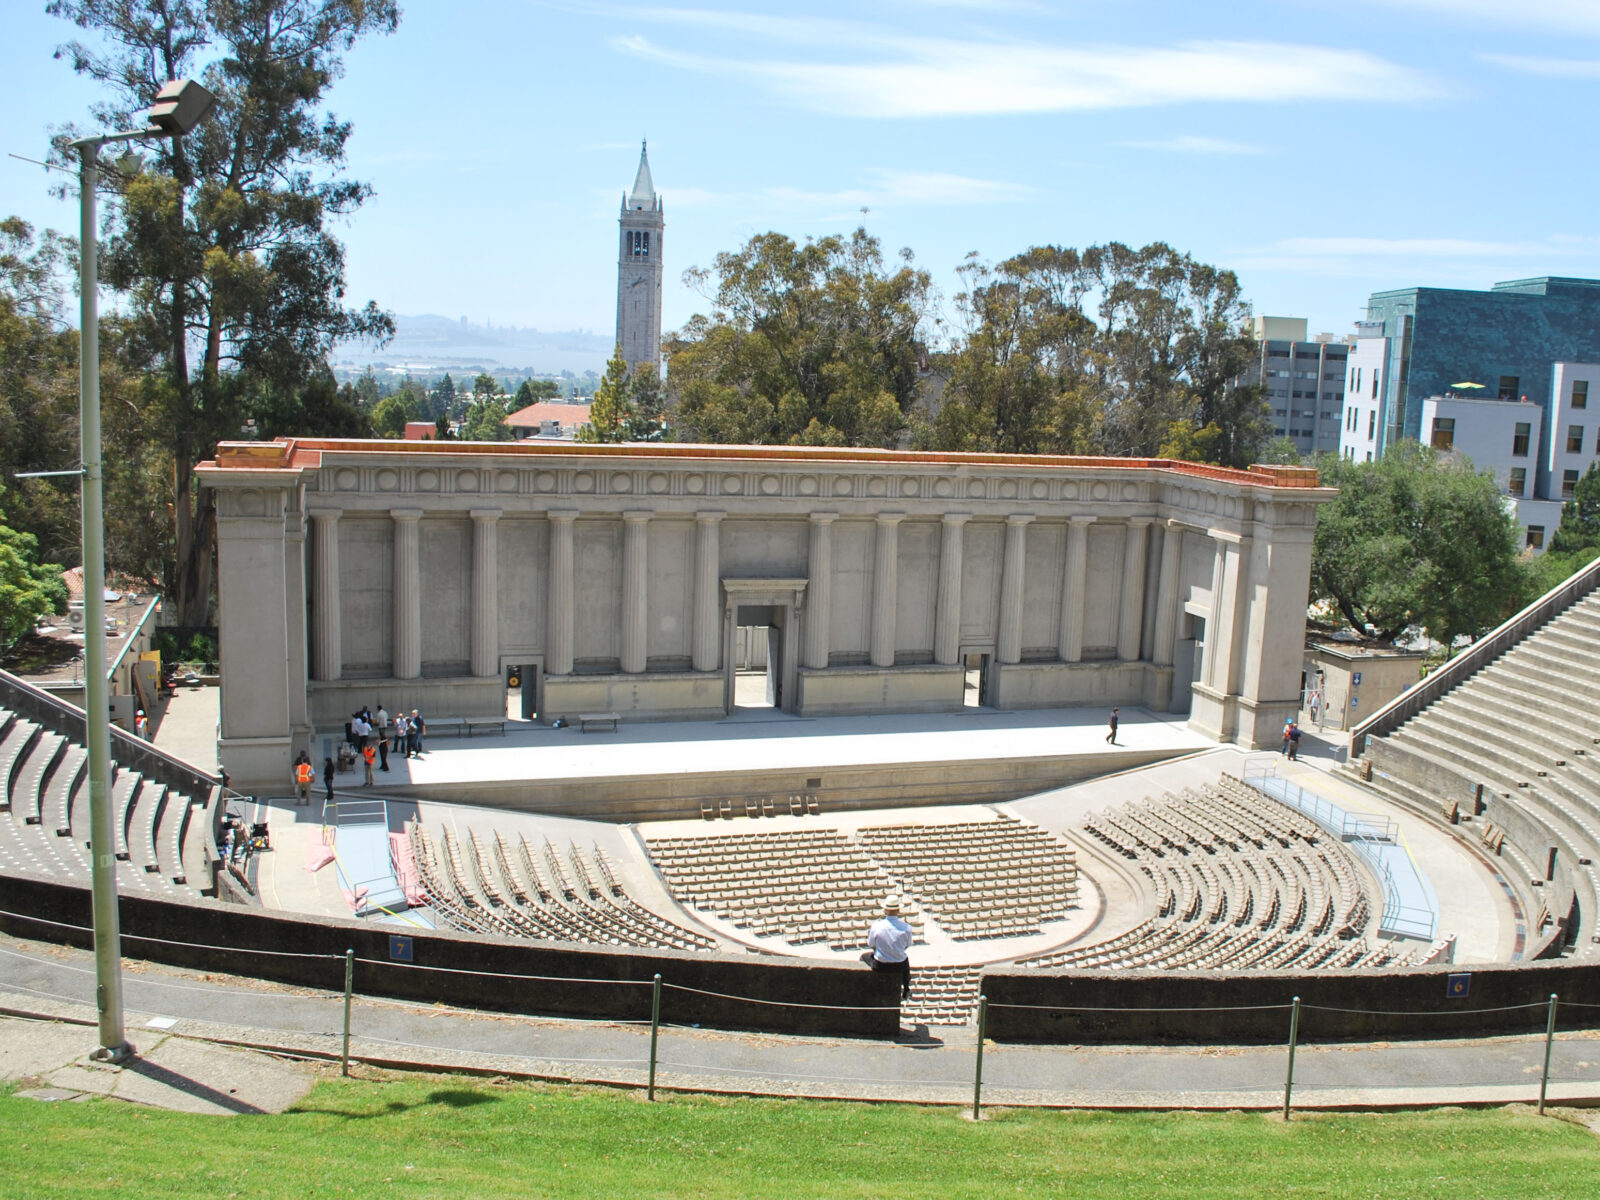 UC Berkeley's Hearst Greek Theatre, which looks like an amphitheater. The clock tower is visible in the background.